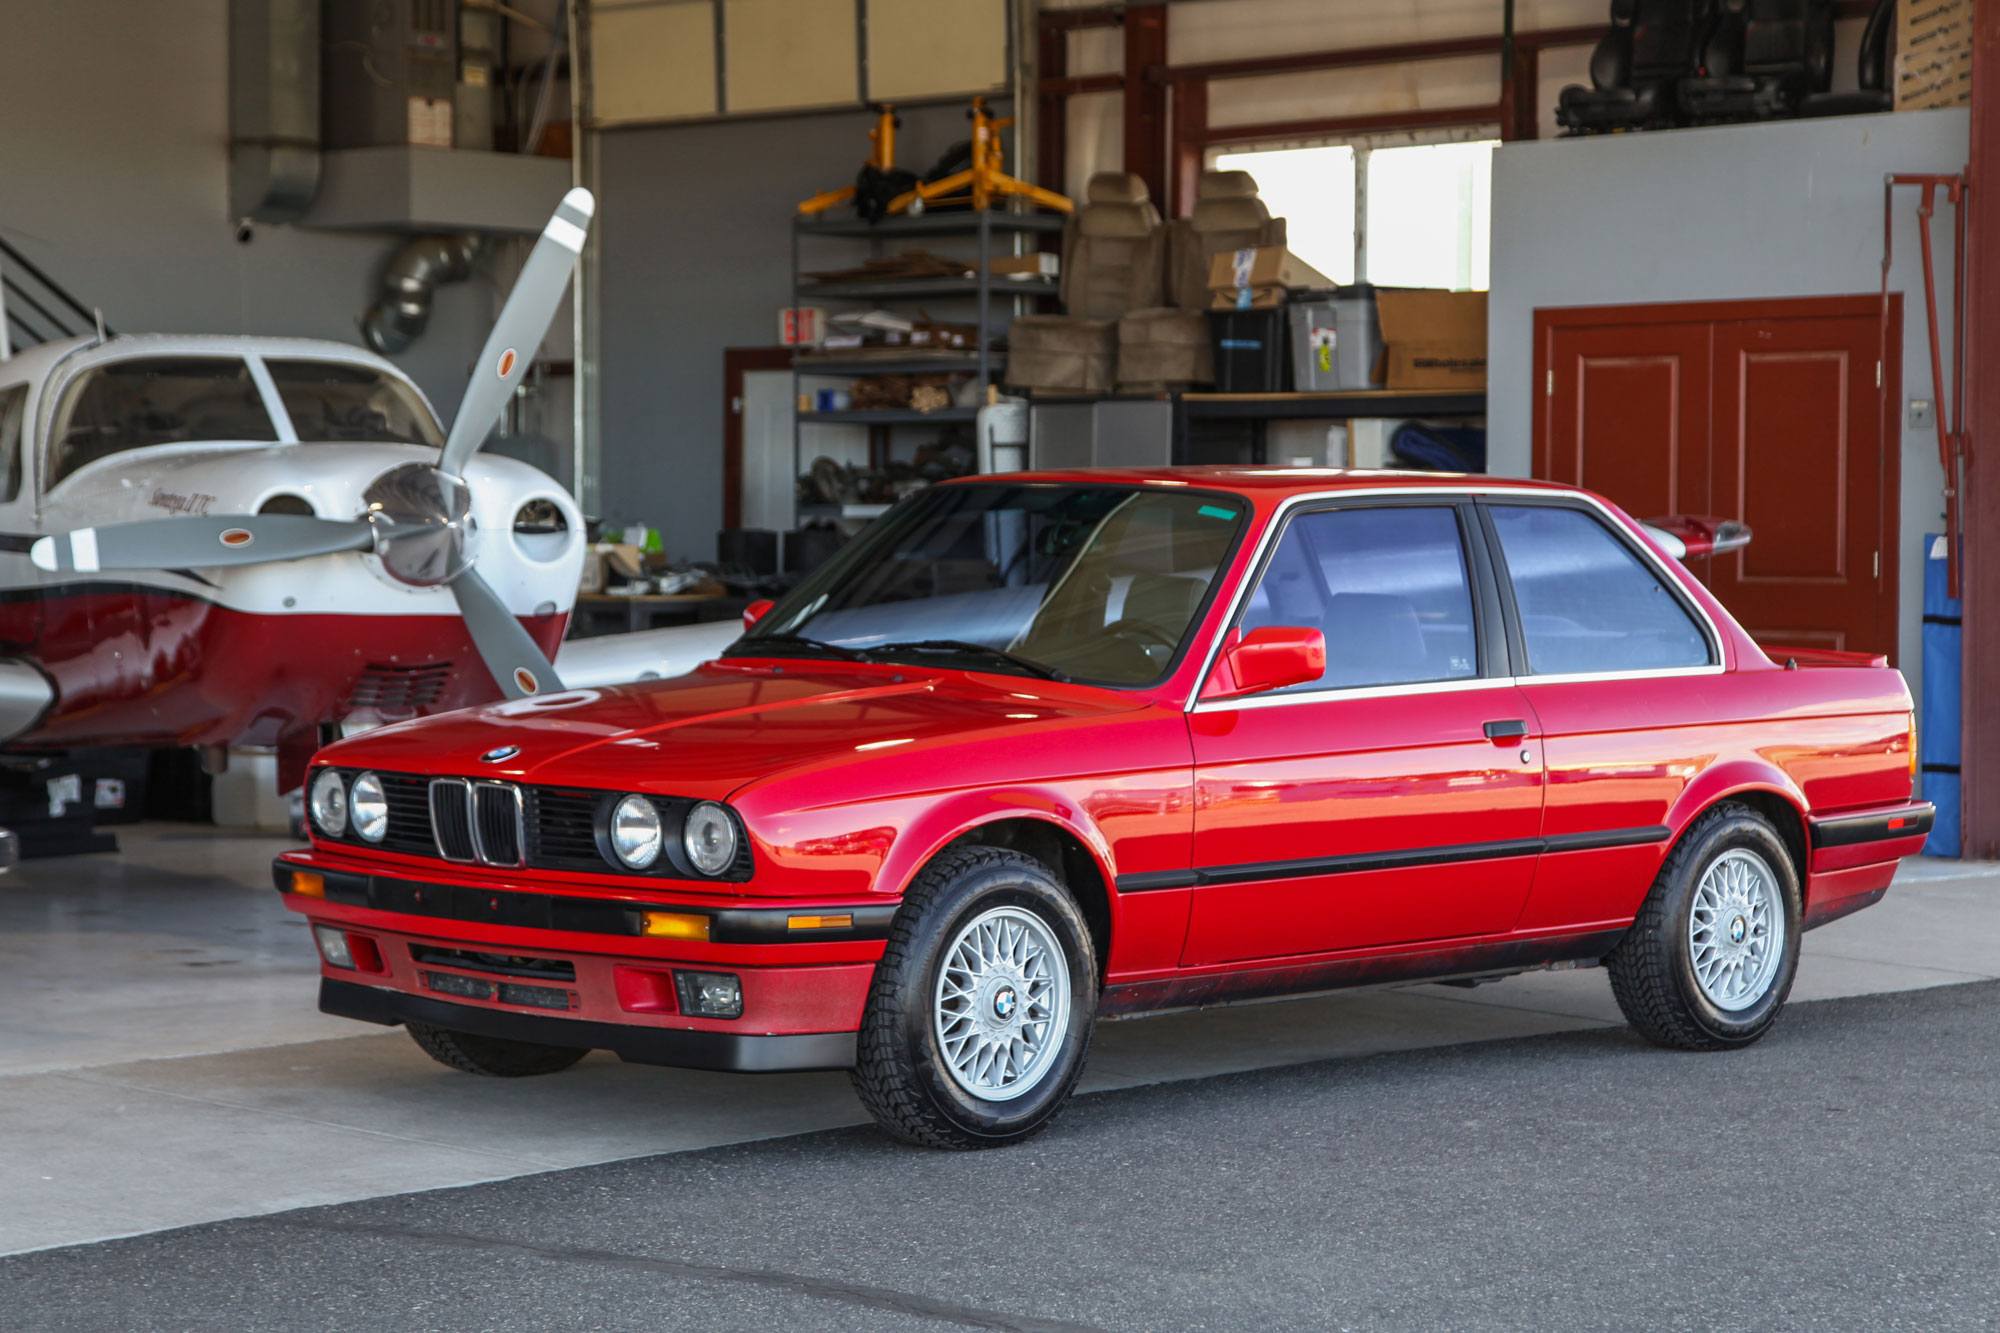 Exterior photo of 1989 BMW (E30) 325iS